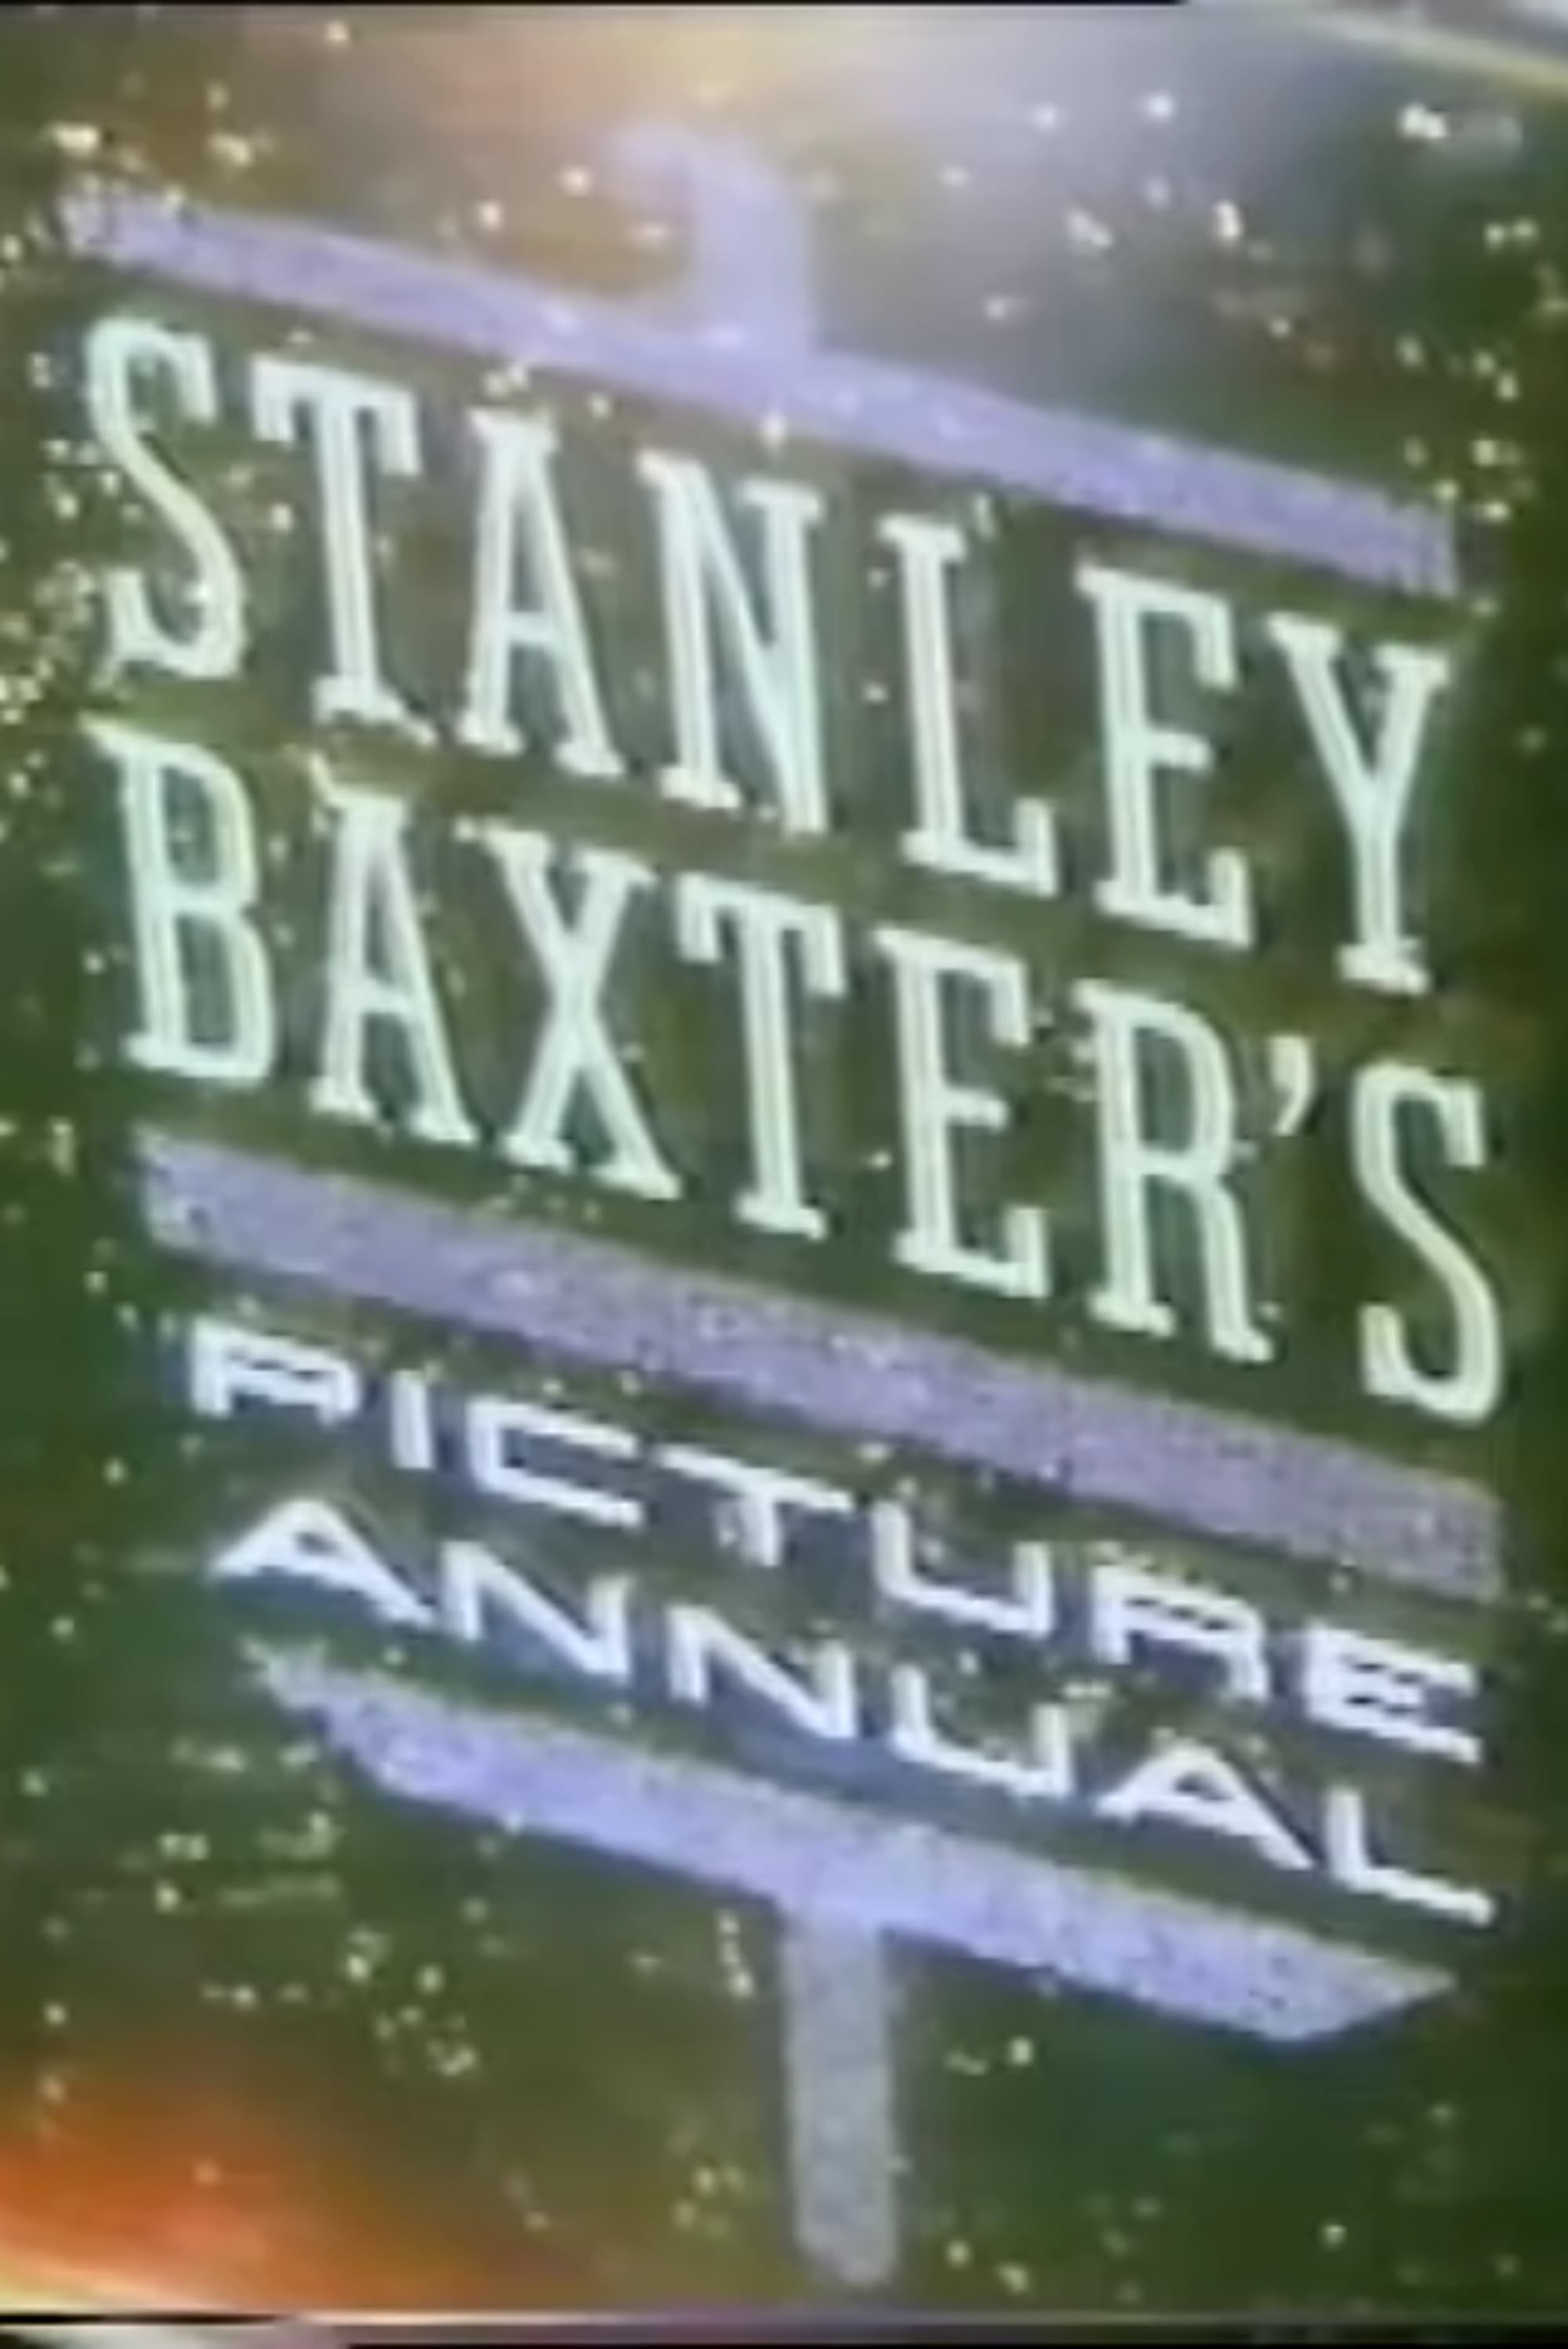 Stanley Baxter's Picture Annual